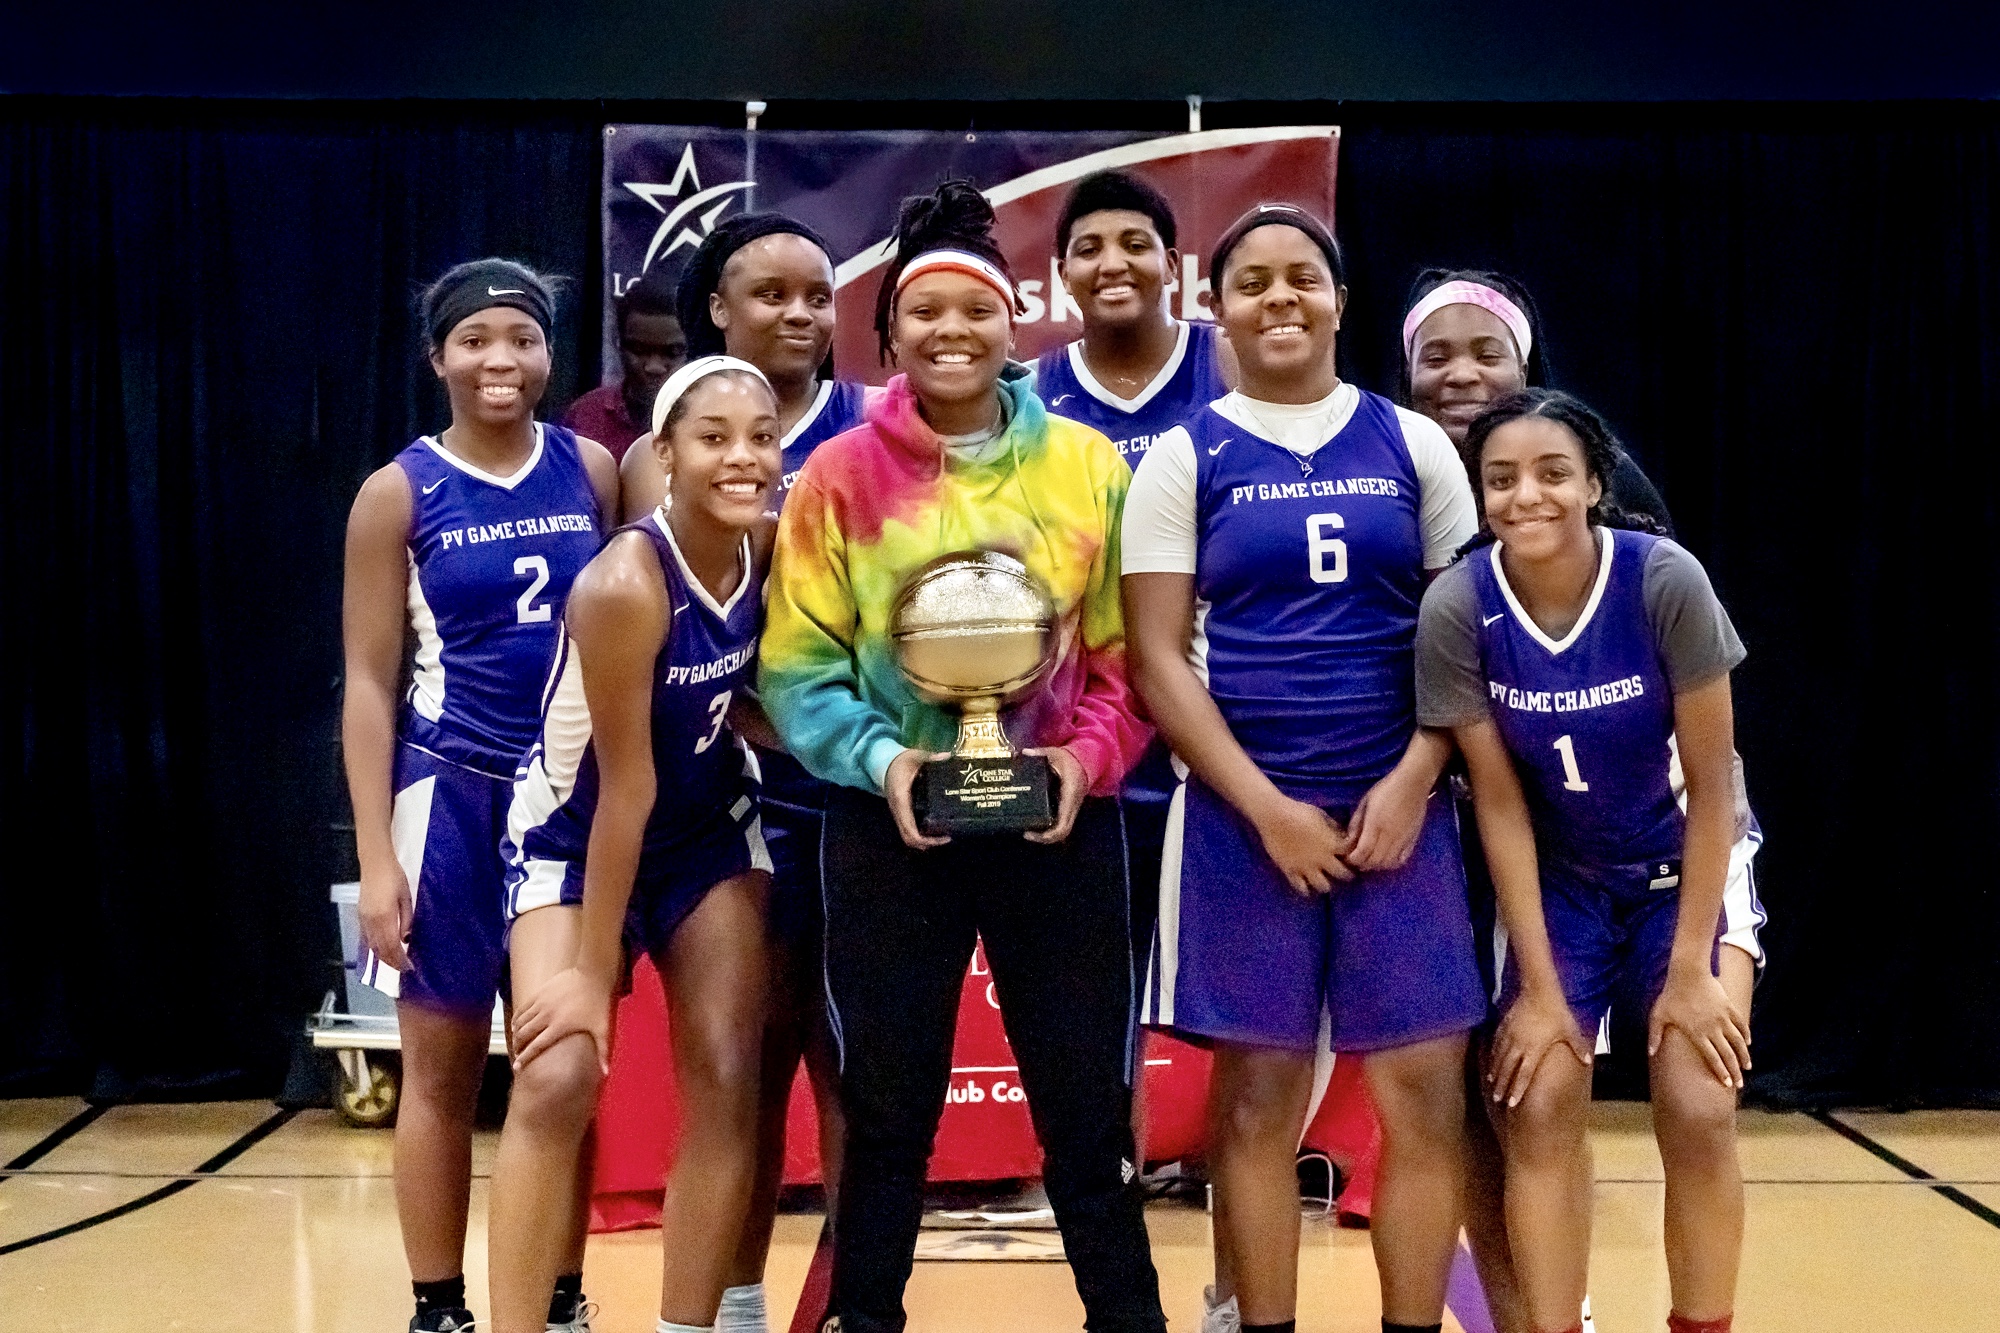 Team photo of students from Prairie View A&M University with a trophy